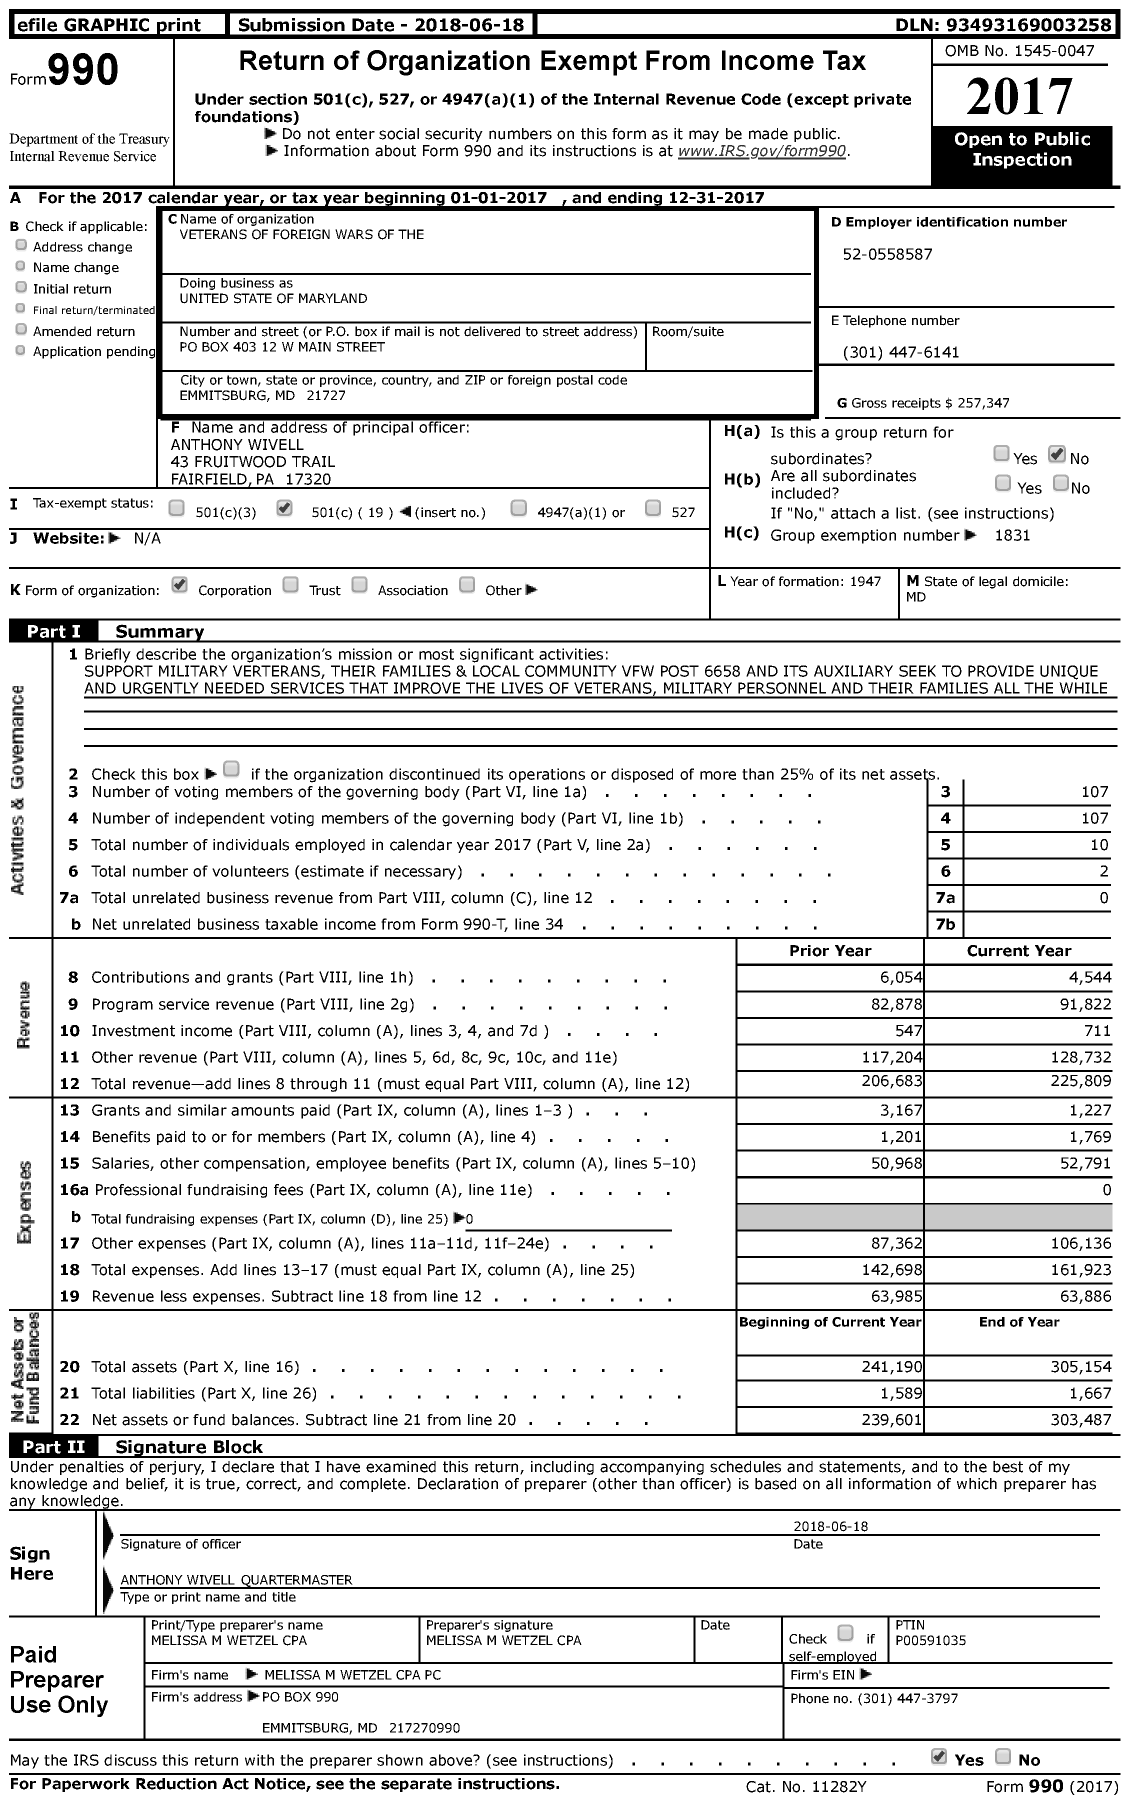 Image of first page of 2017 Form 990 for VFW Department of Maryland - United State of Maryland